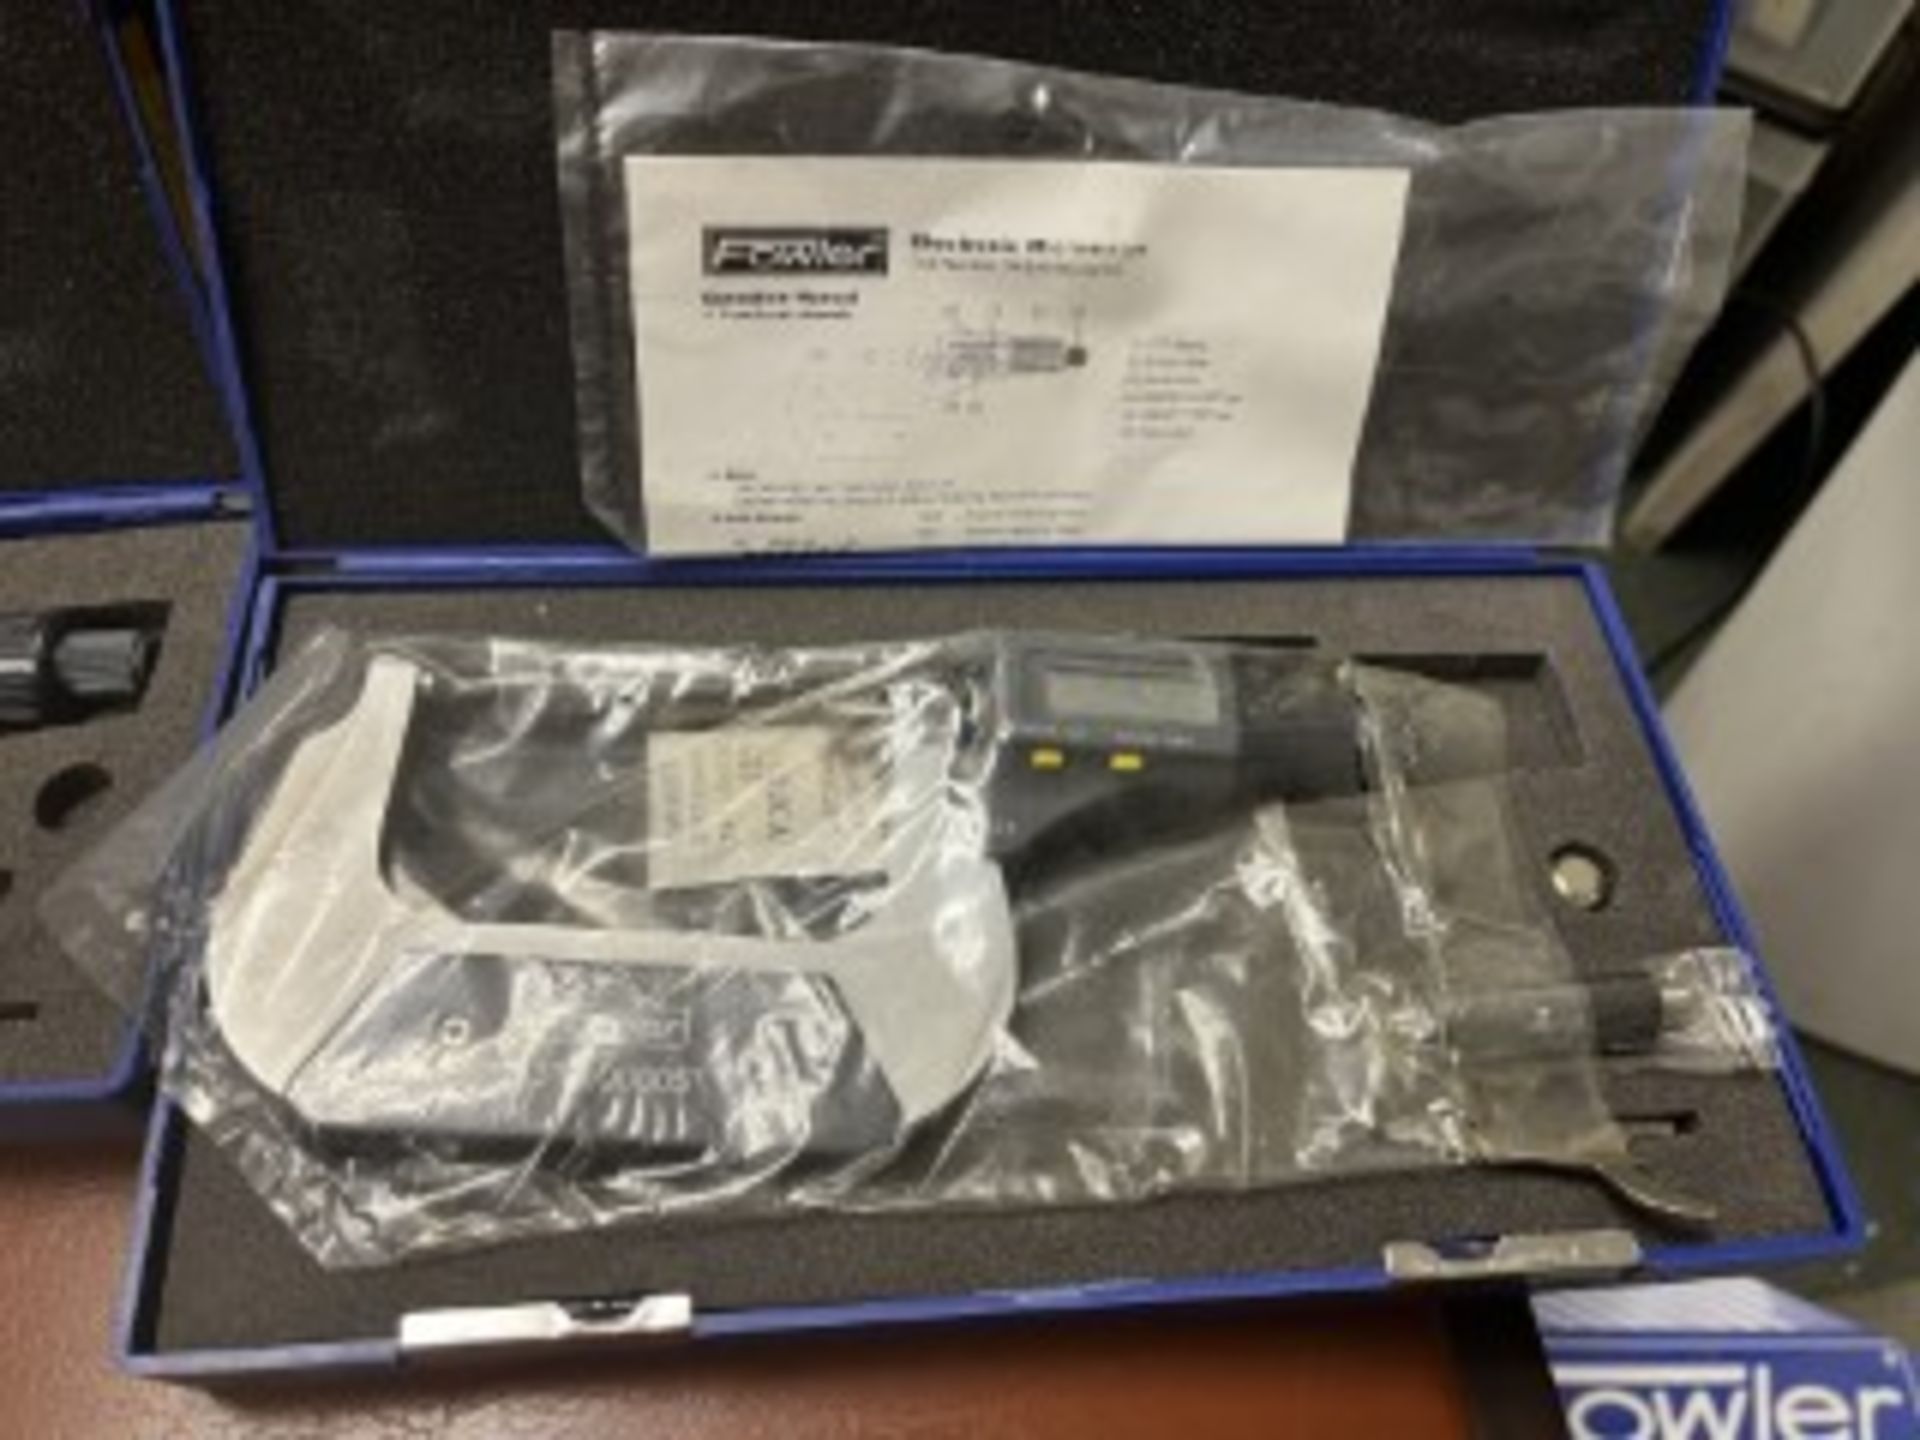 FOWLER ELECTRONIC BLADE MICROMETERS - Image 4 of 5